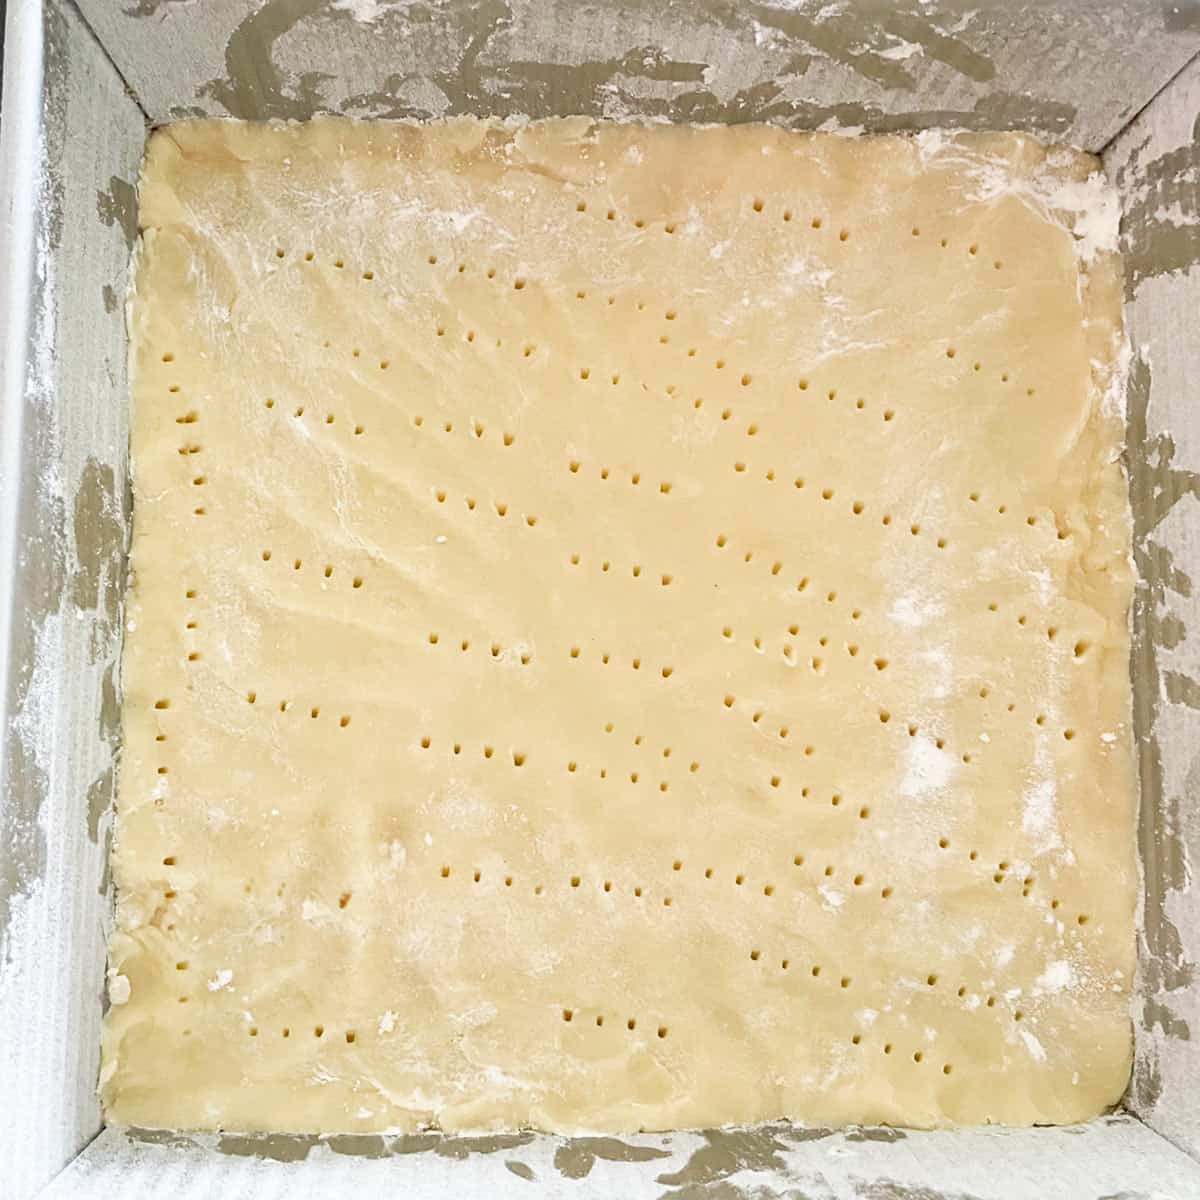 Shortbread crust pressed into square pan ready to be baked with fork marks.